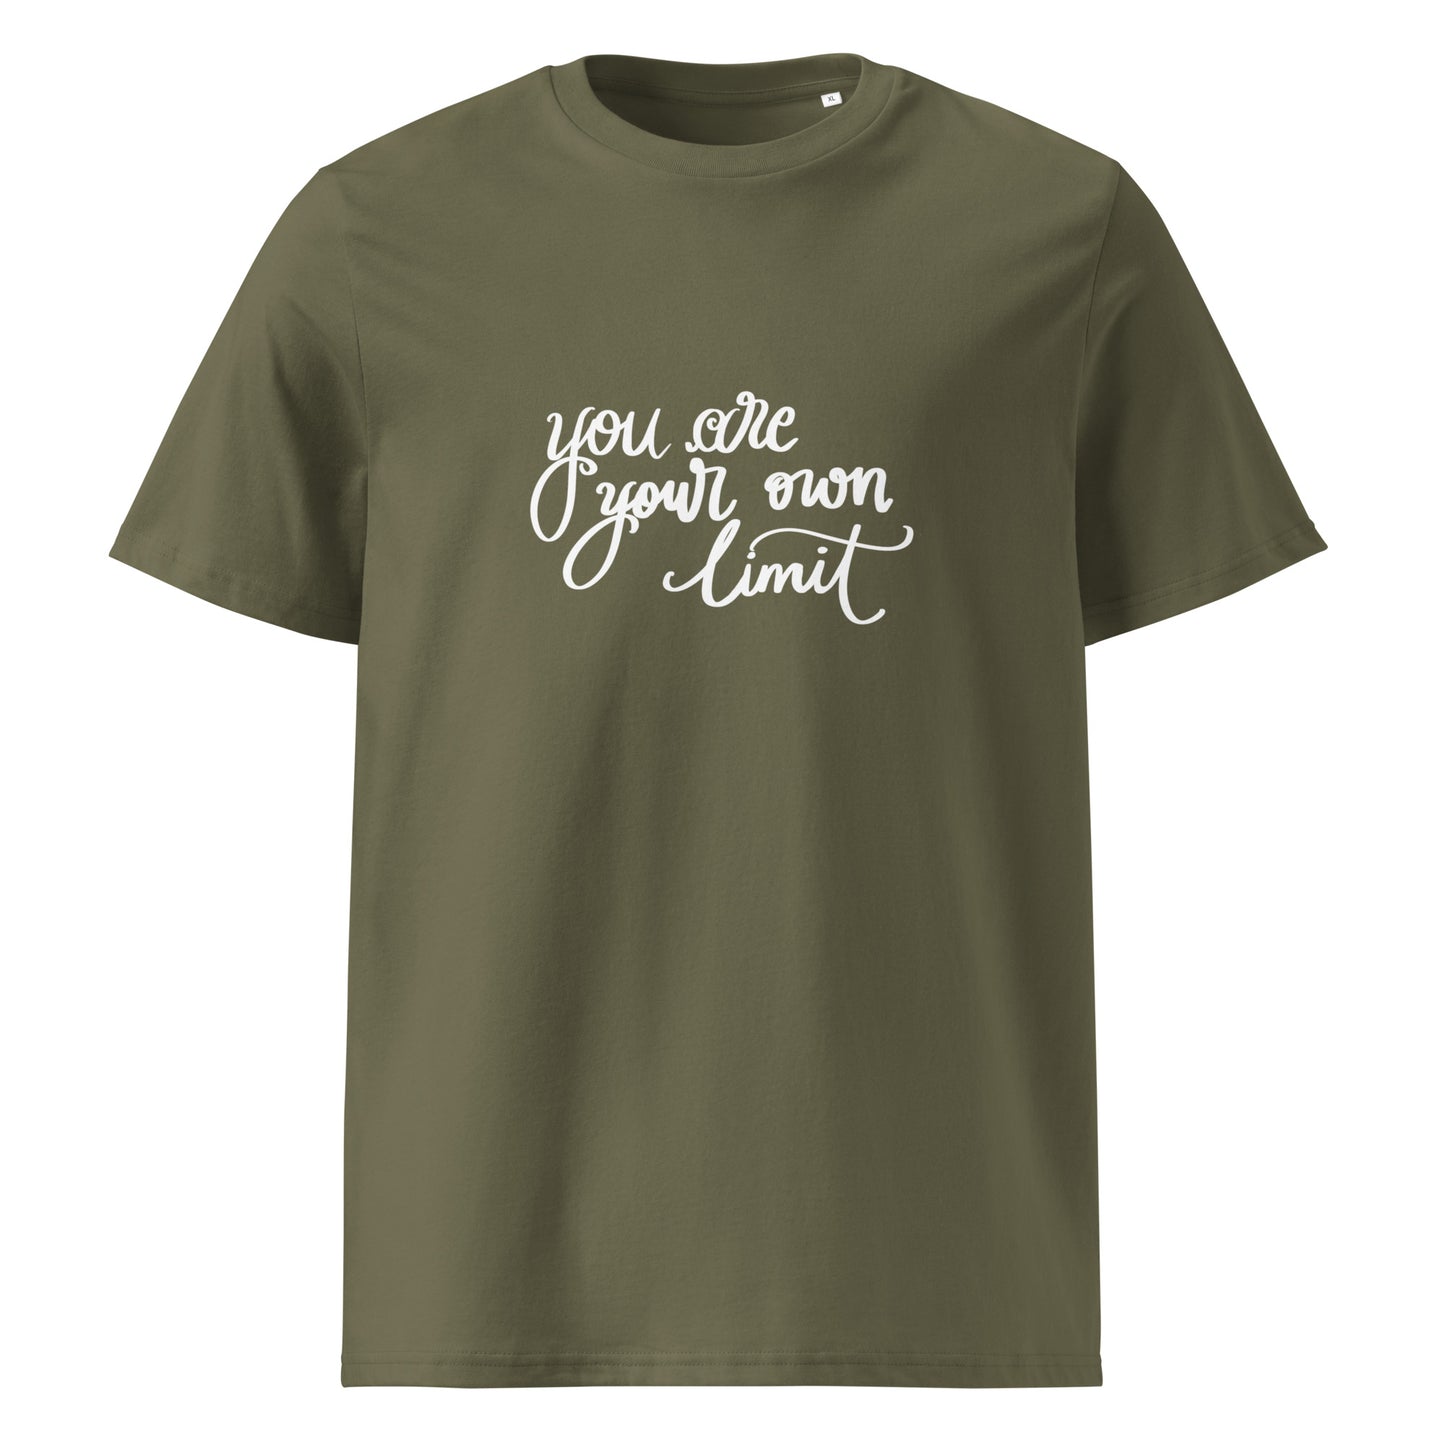 Unisex organic cotton t-shirt "you are your own limit"